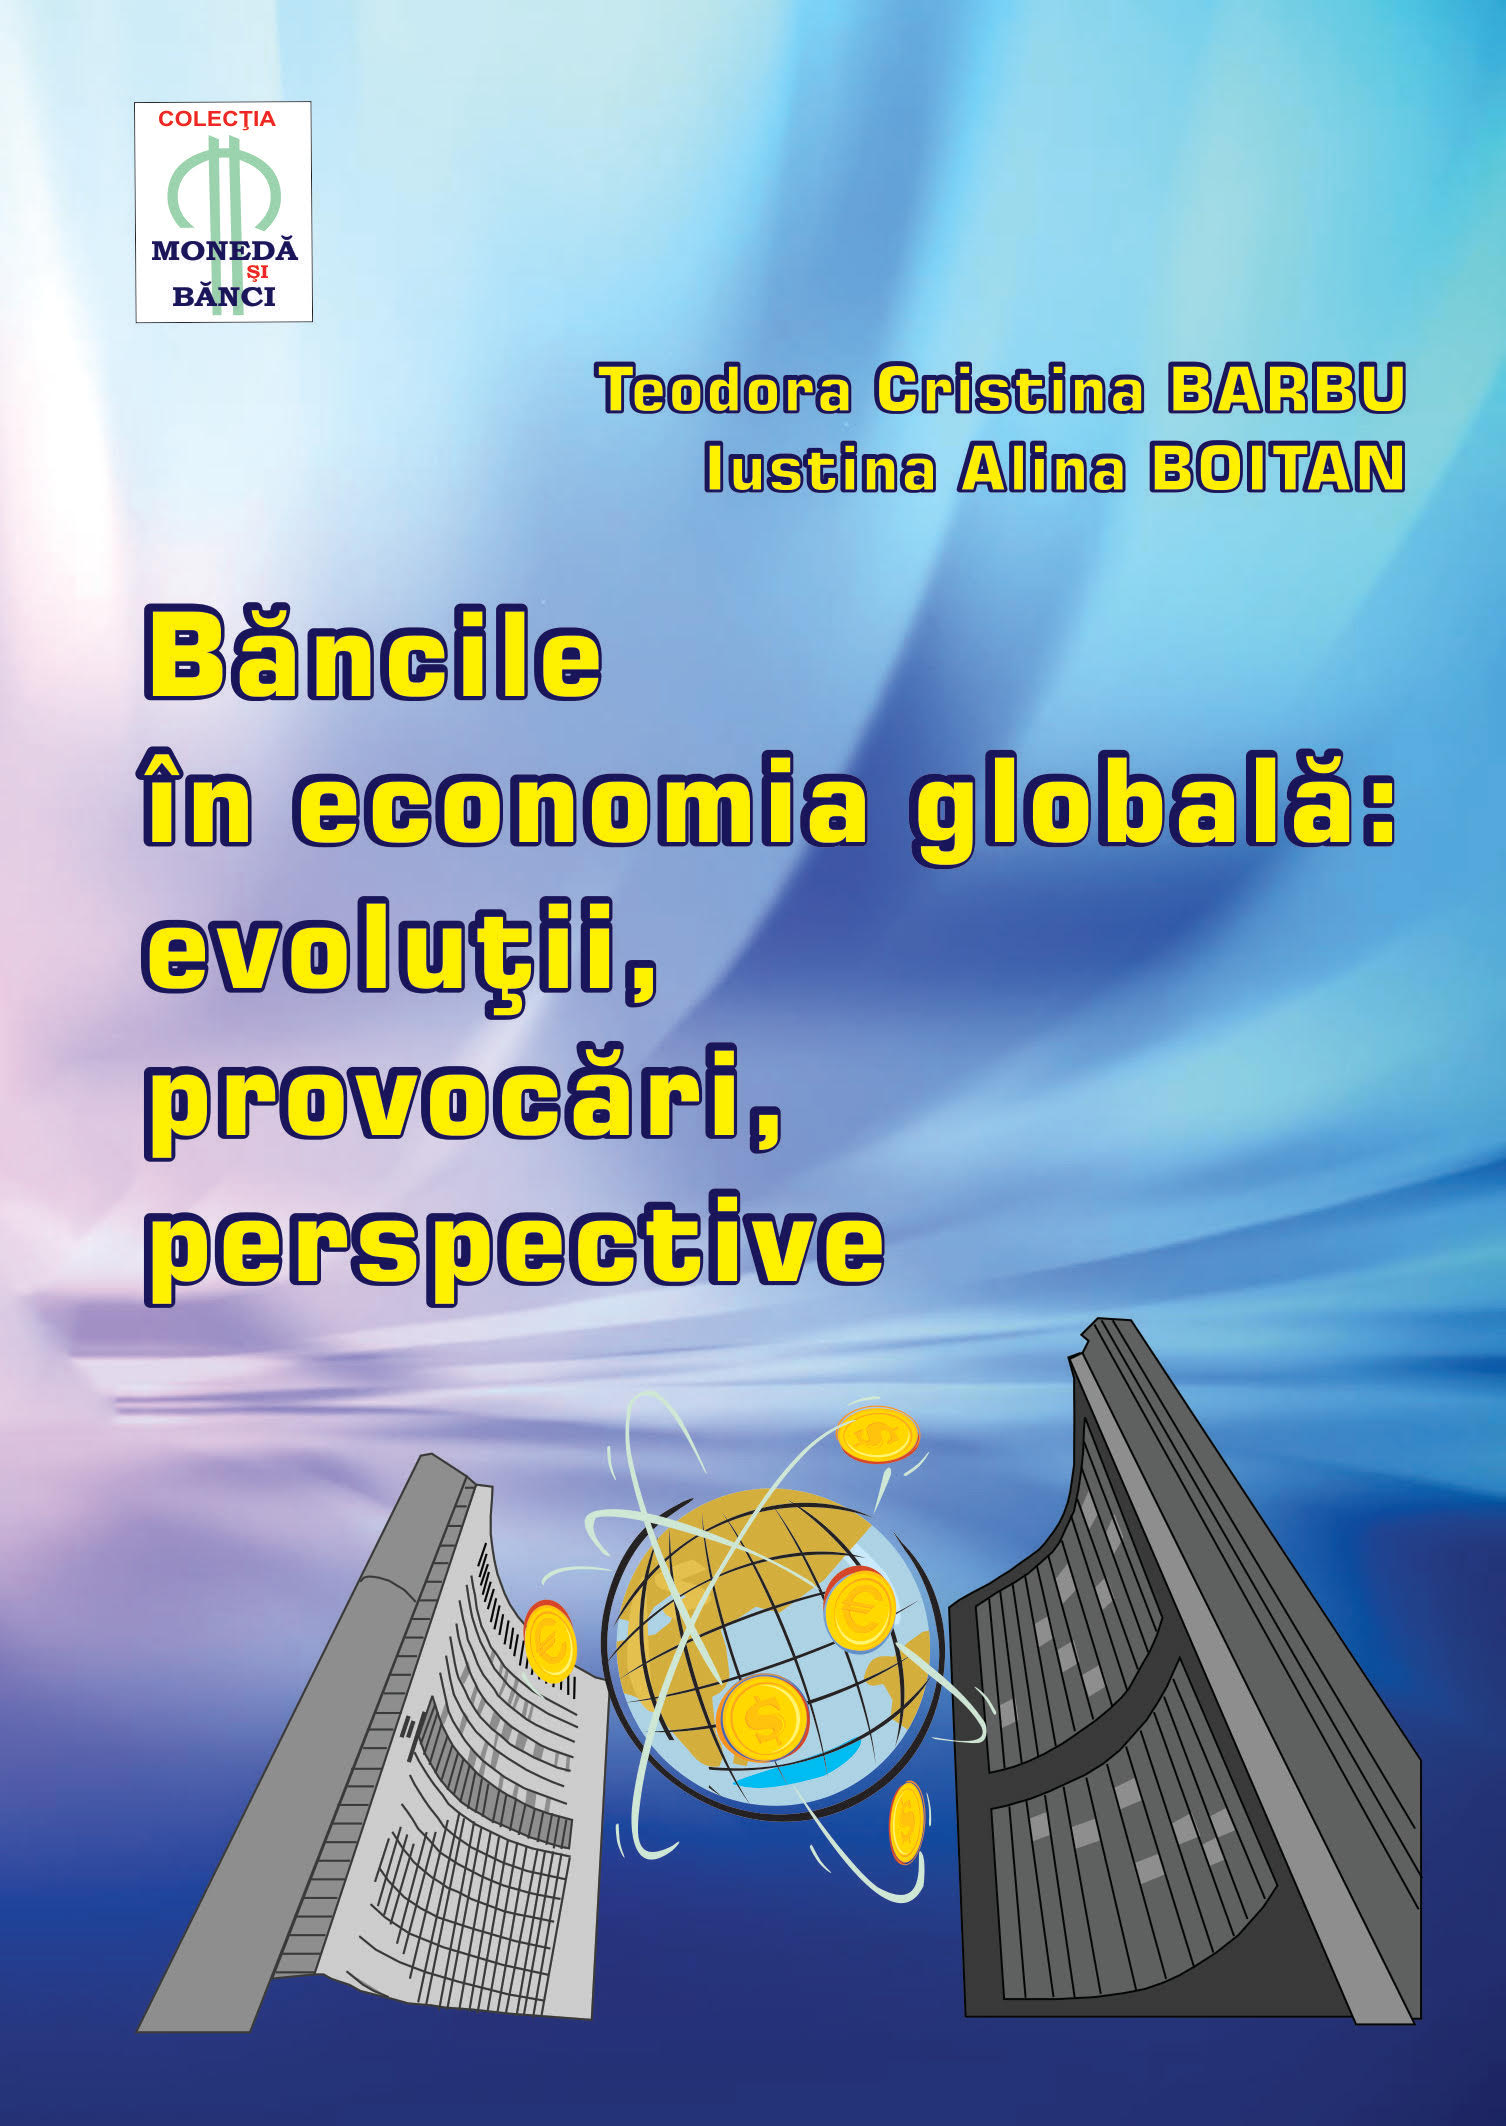 Banks in the Global Economy: evolutions, challenges, trends